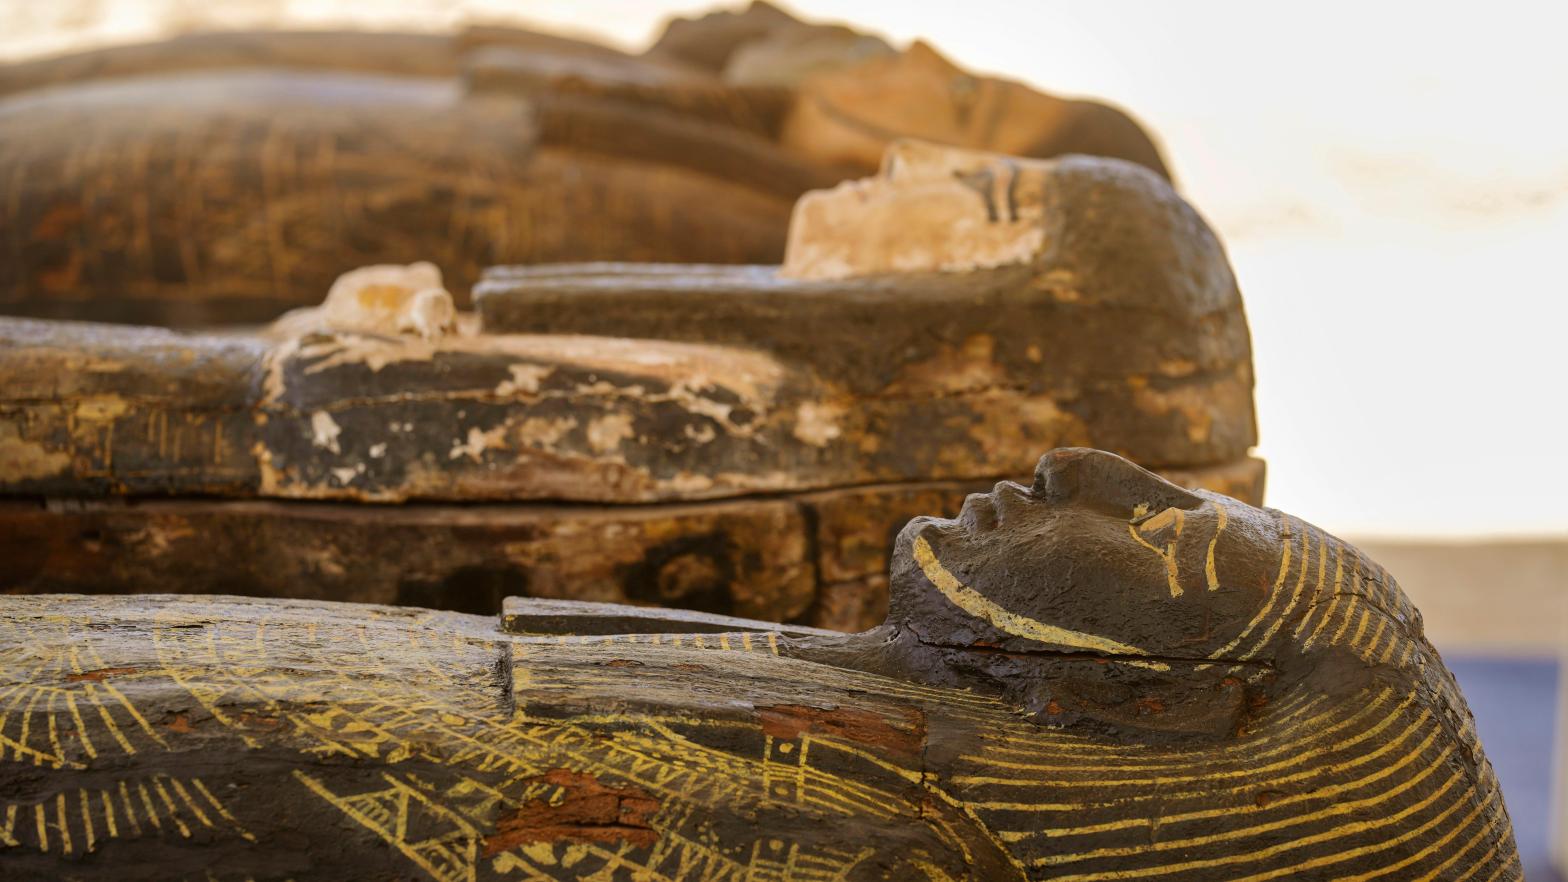 Some 250 painted sarcophagi were put on the makeshift exhibit.  (Photo: Amr Nabil, AP)